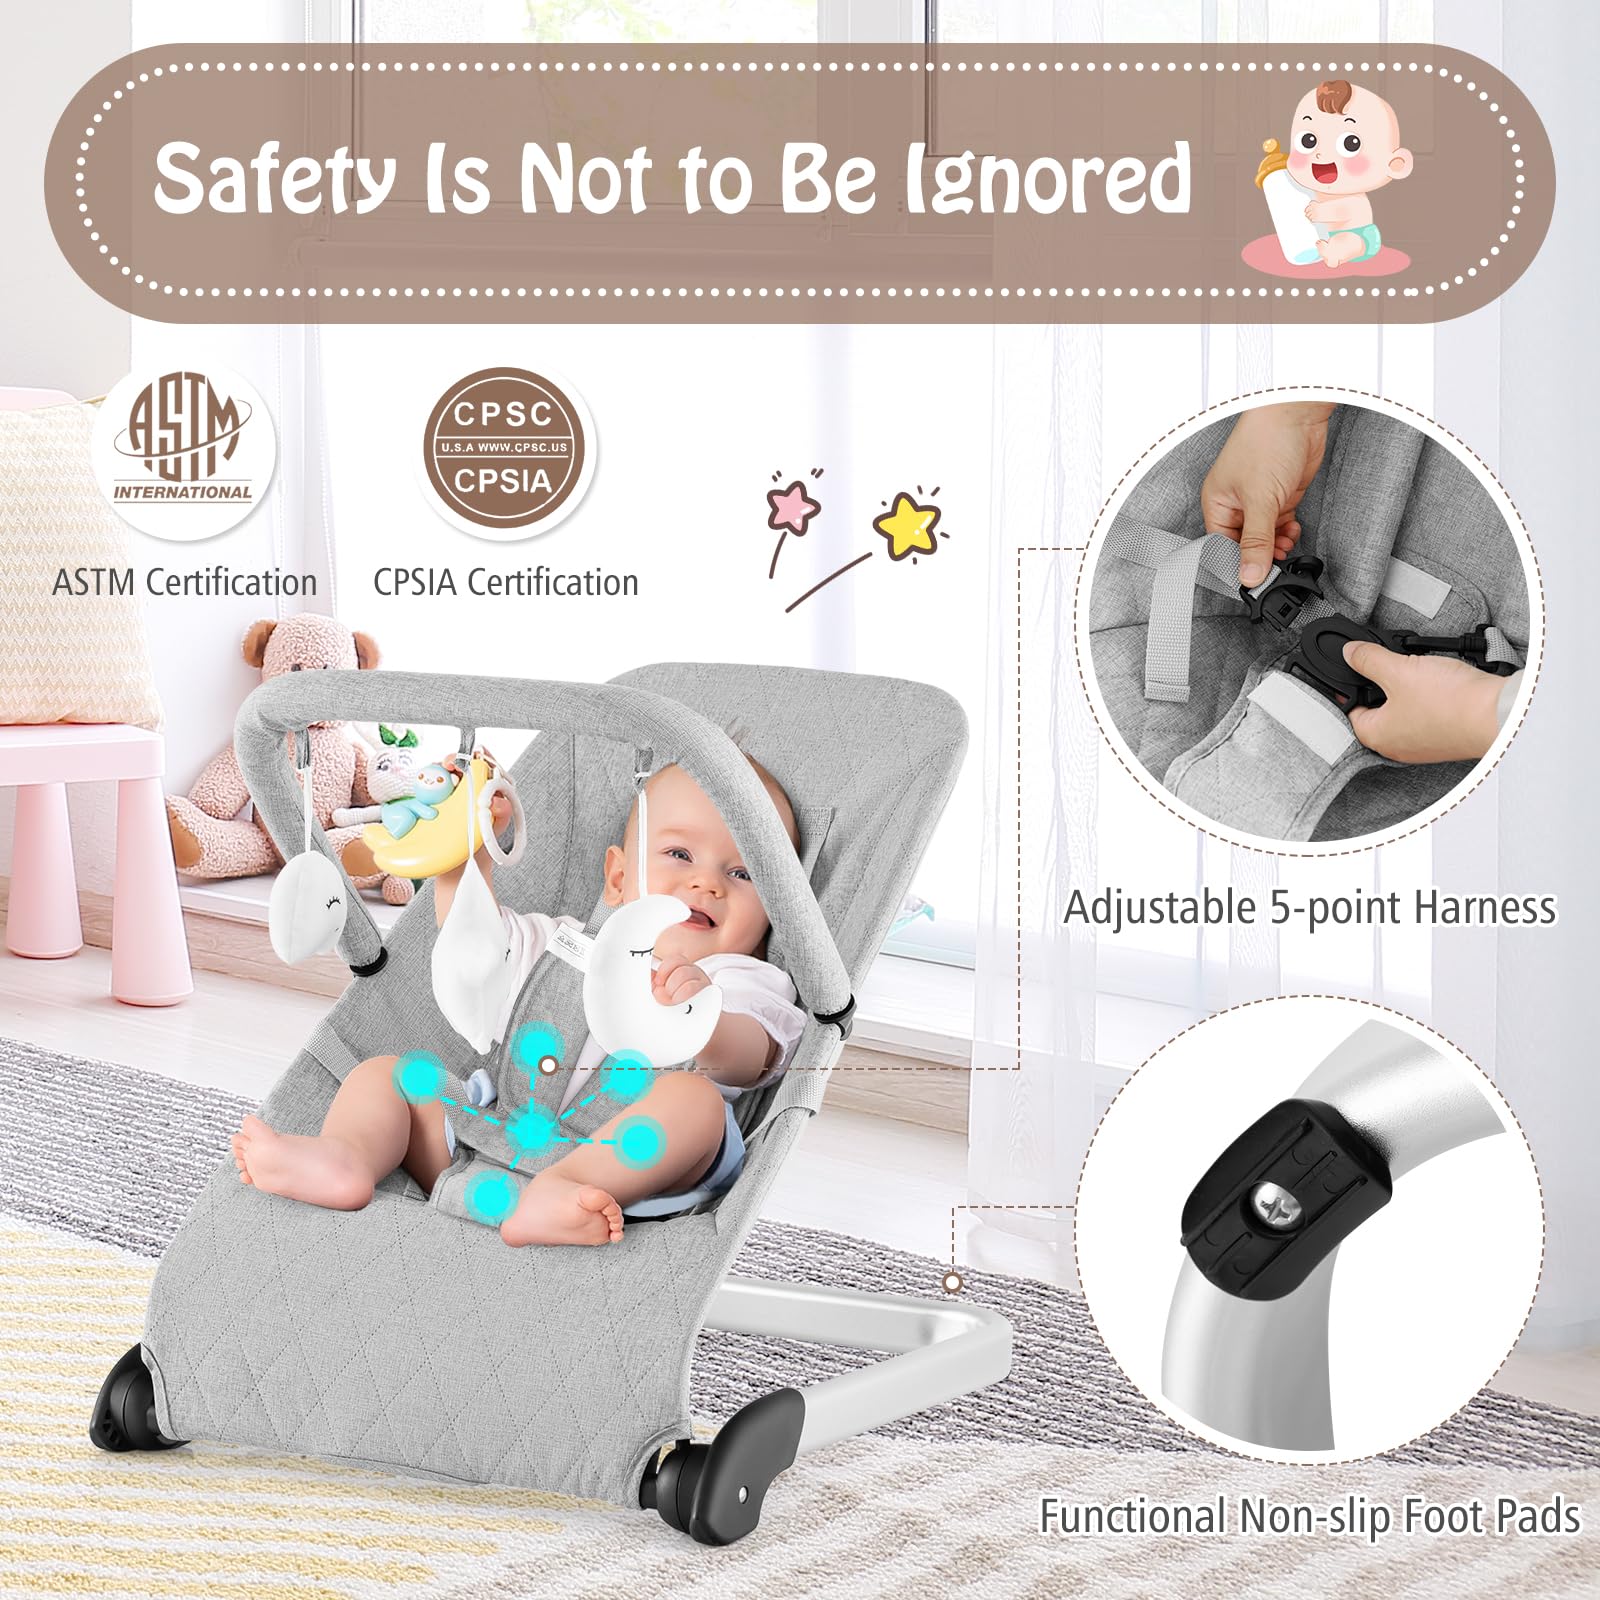 CPSC staff recommends first safety rules for infant rockers after